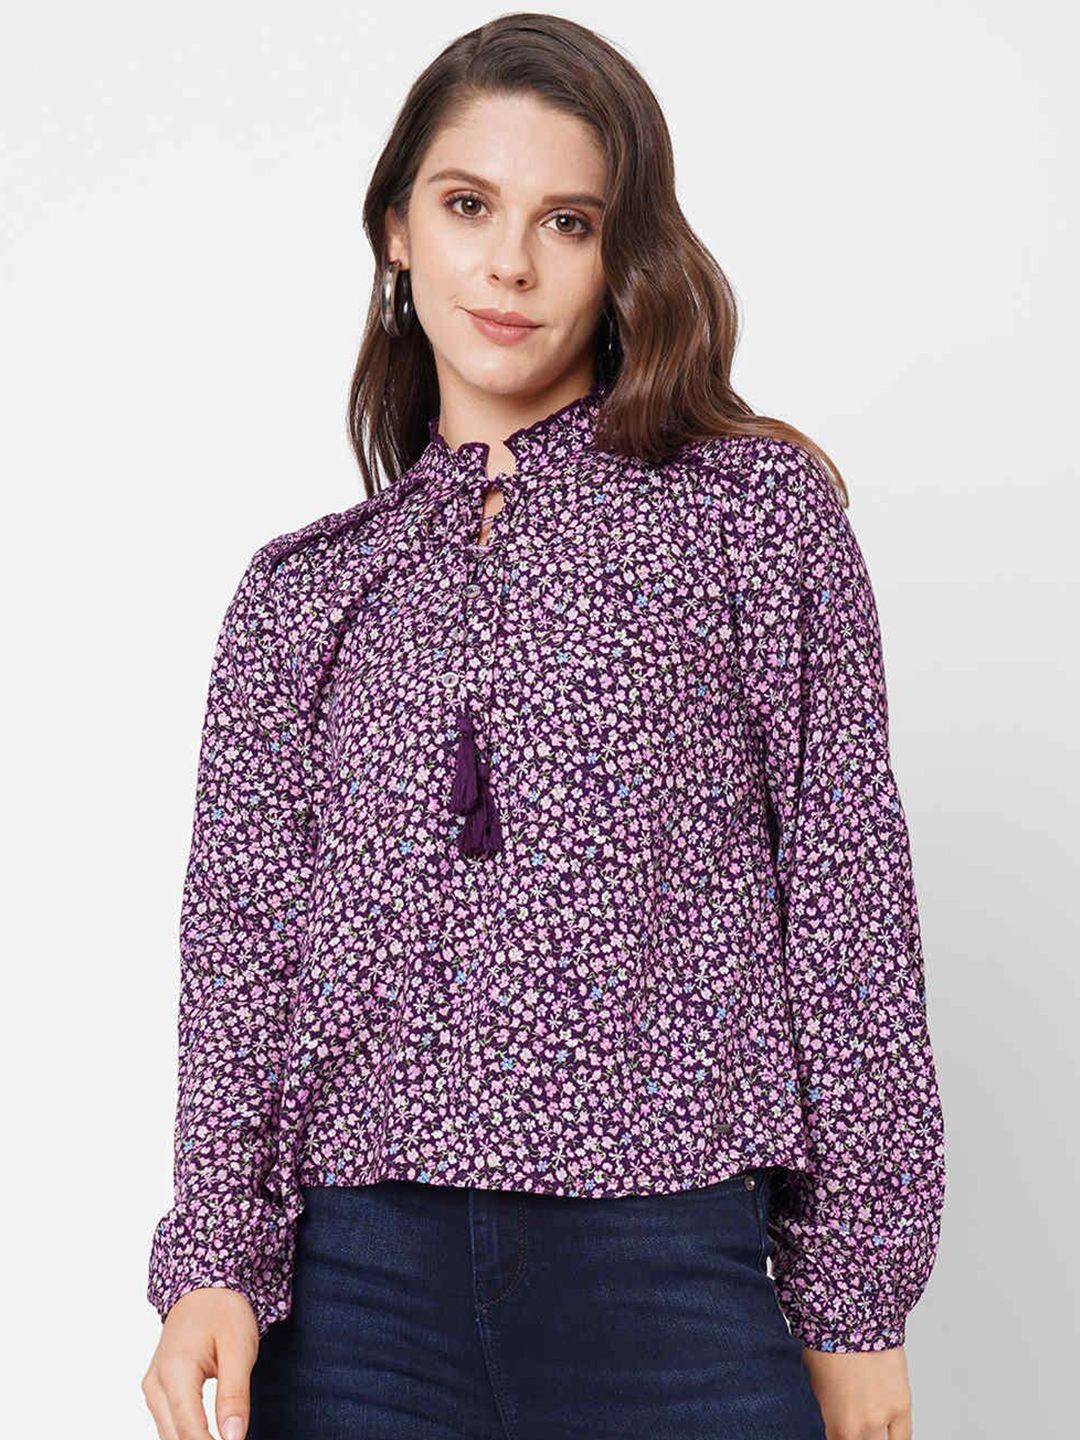 Pepe Jeans Red Floral Print Tie-Up Neck Crepe Top Price in India